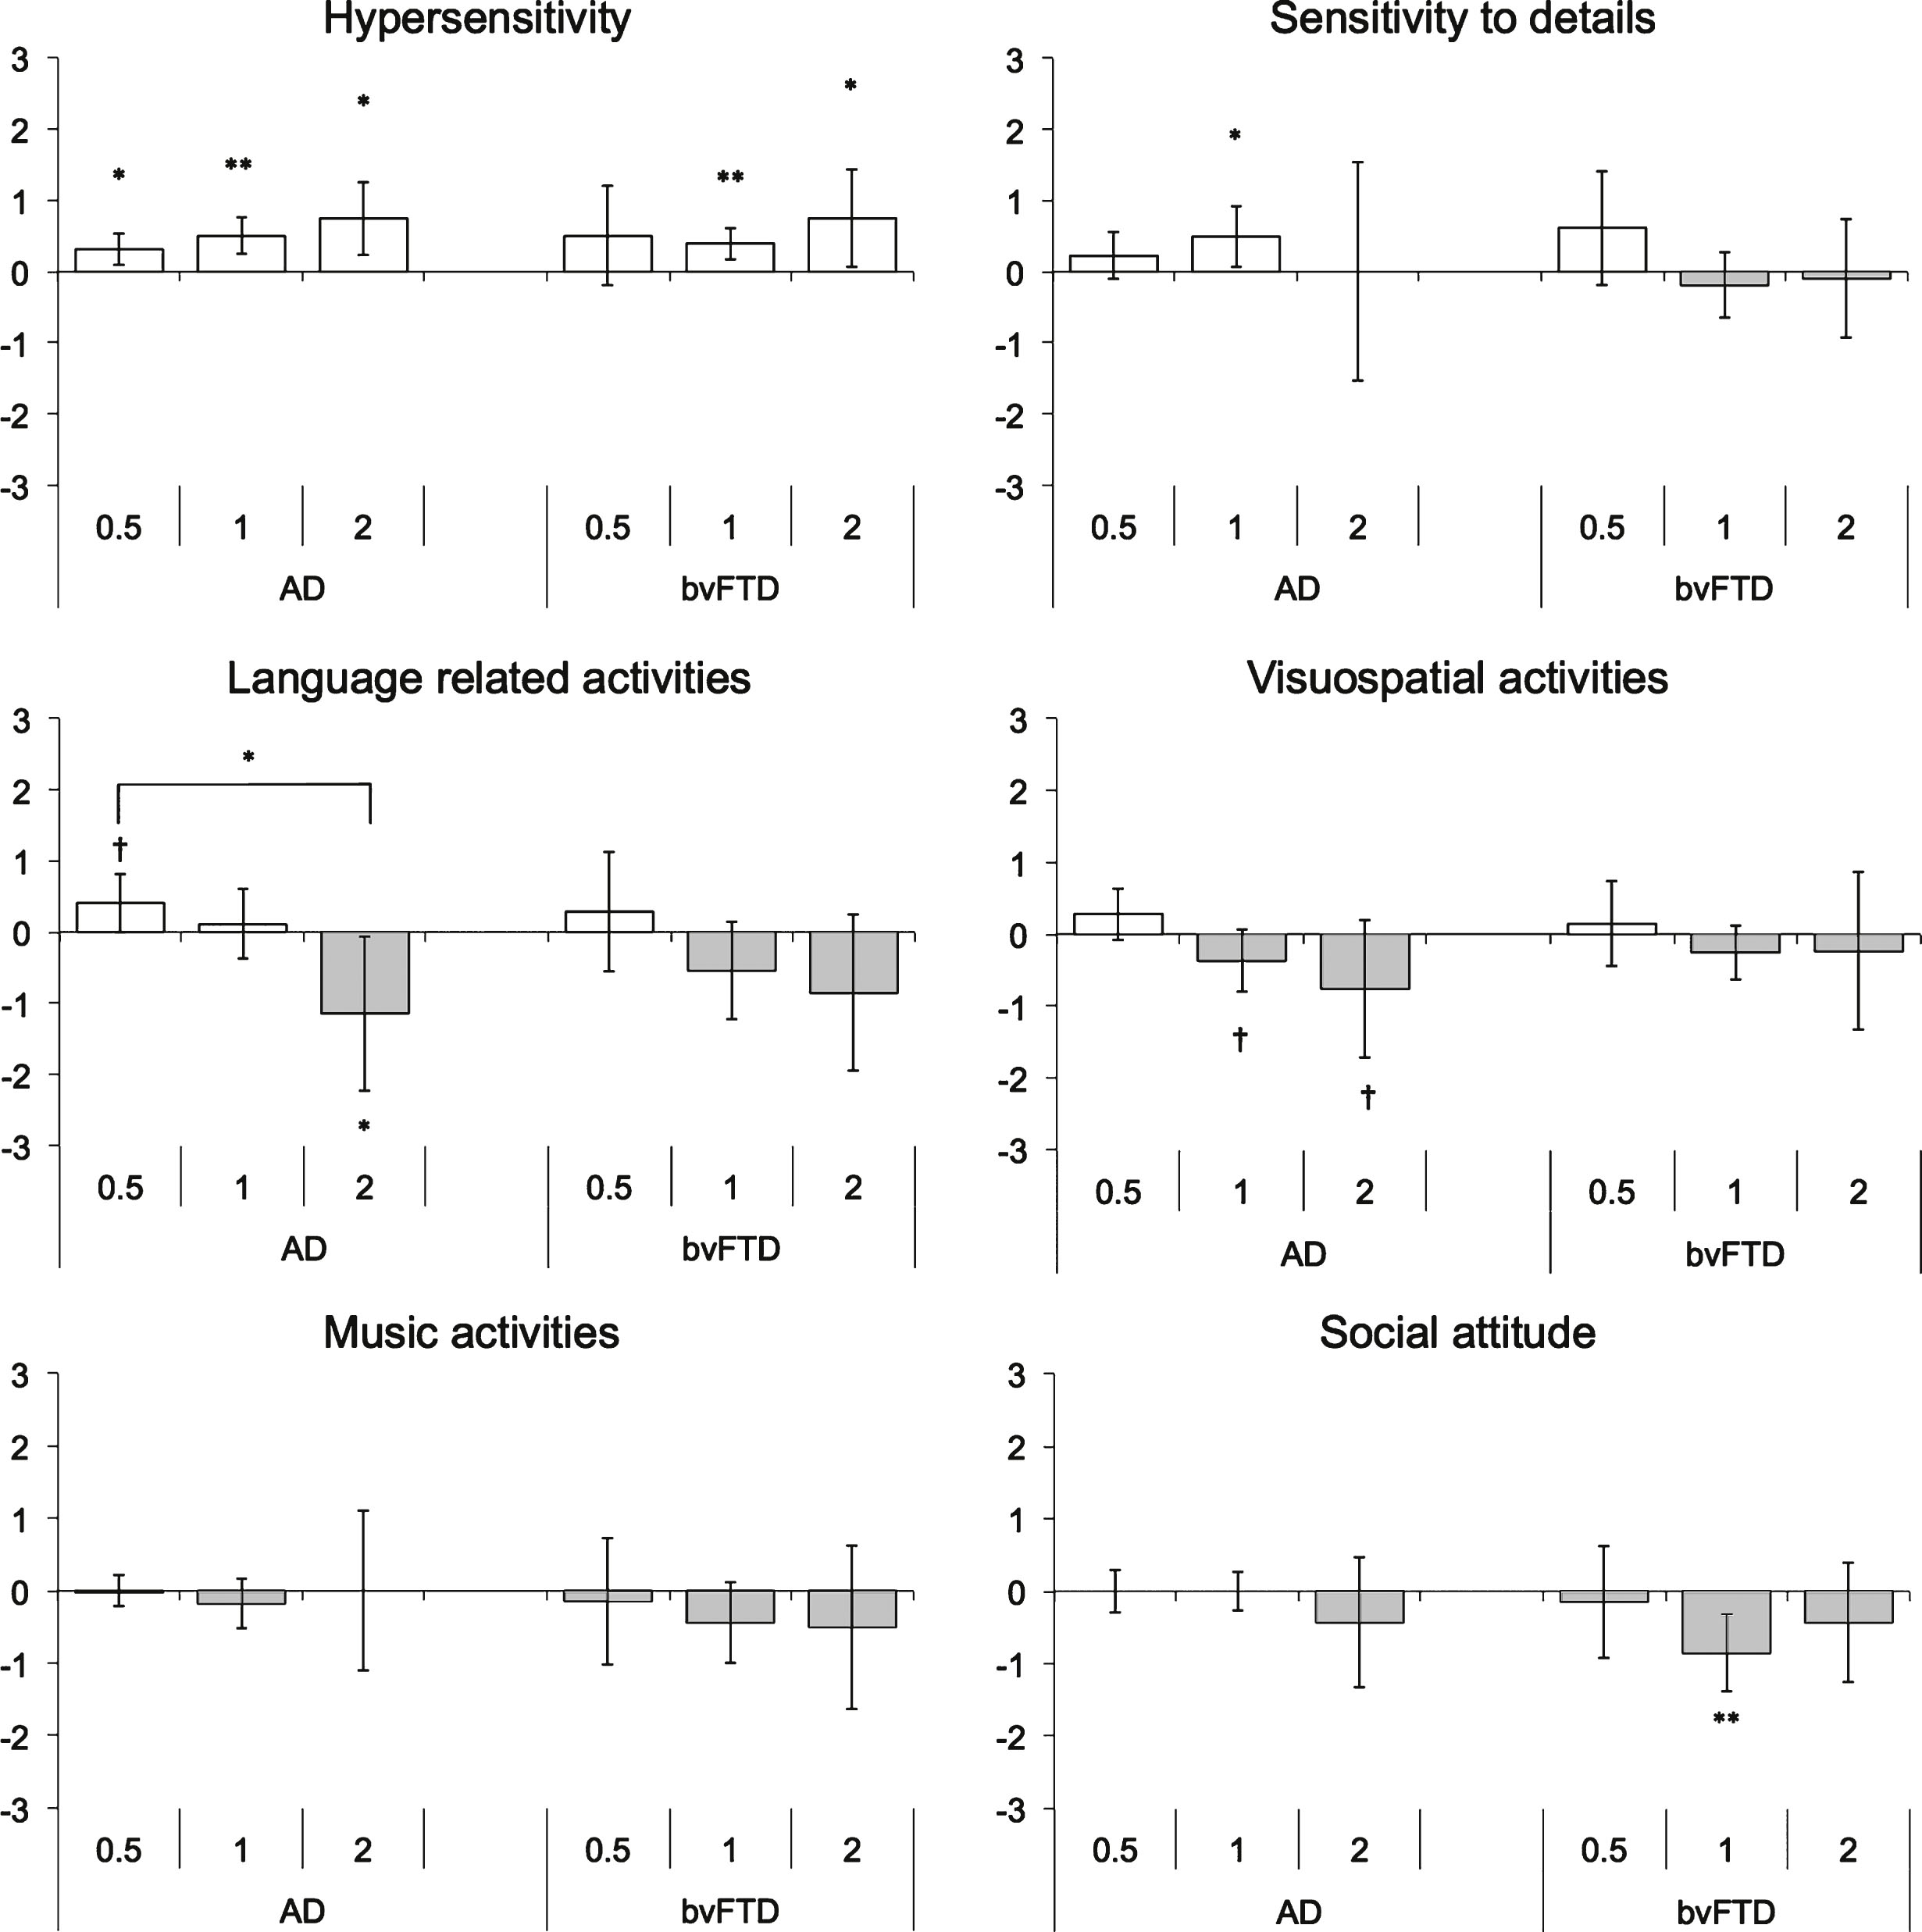 Mean component scores across disease severity in Alzheimer’s disease and behavioral-variant frontotemporal dementia. Error bars indicate ± 95% CI for each disease severity (CDR 0.5/1/ 2). White bars denote increase in behavior and gray bars denote decrease in behavior. *p < 0.05; **p < 0.01. †denotes trend toward significance in observed differences (p < 0.10).